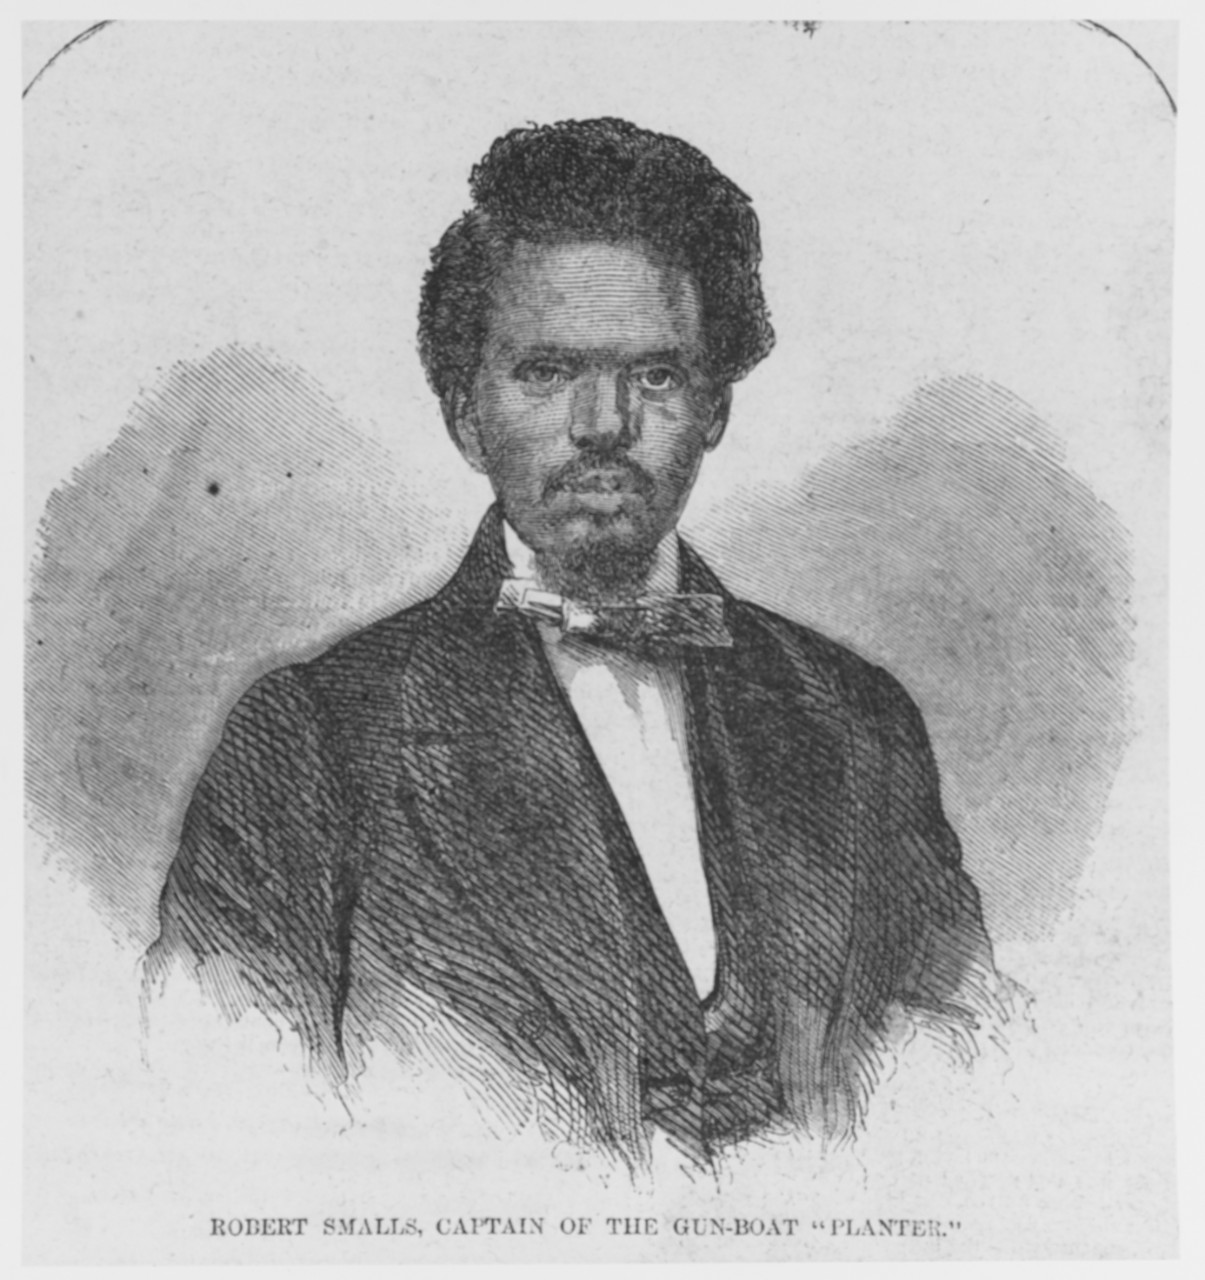 Engraved portrait of Robert Smalls, originally published in Harper’s Weekly, circa 1862 (NH 58870).